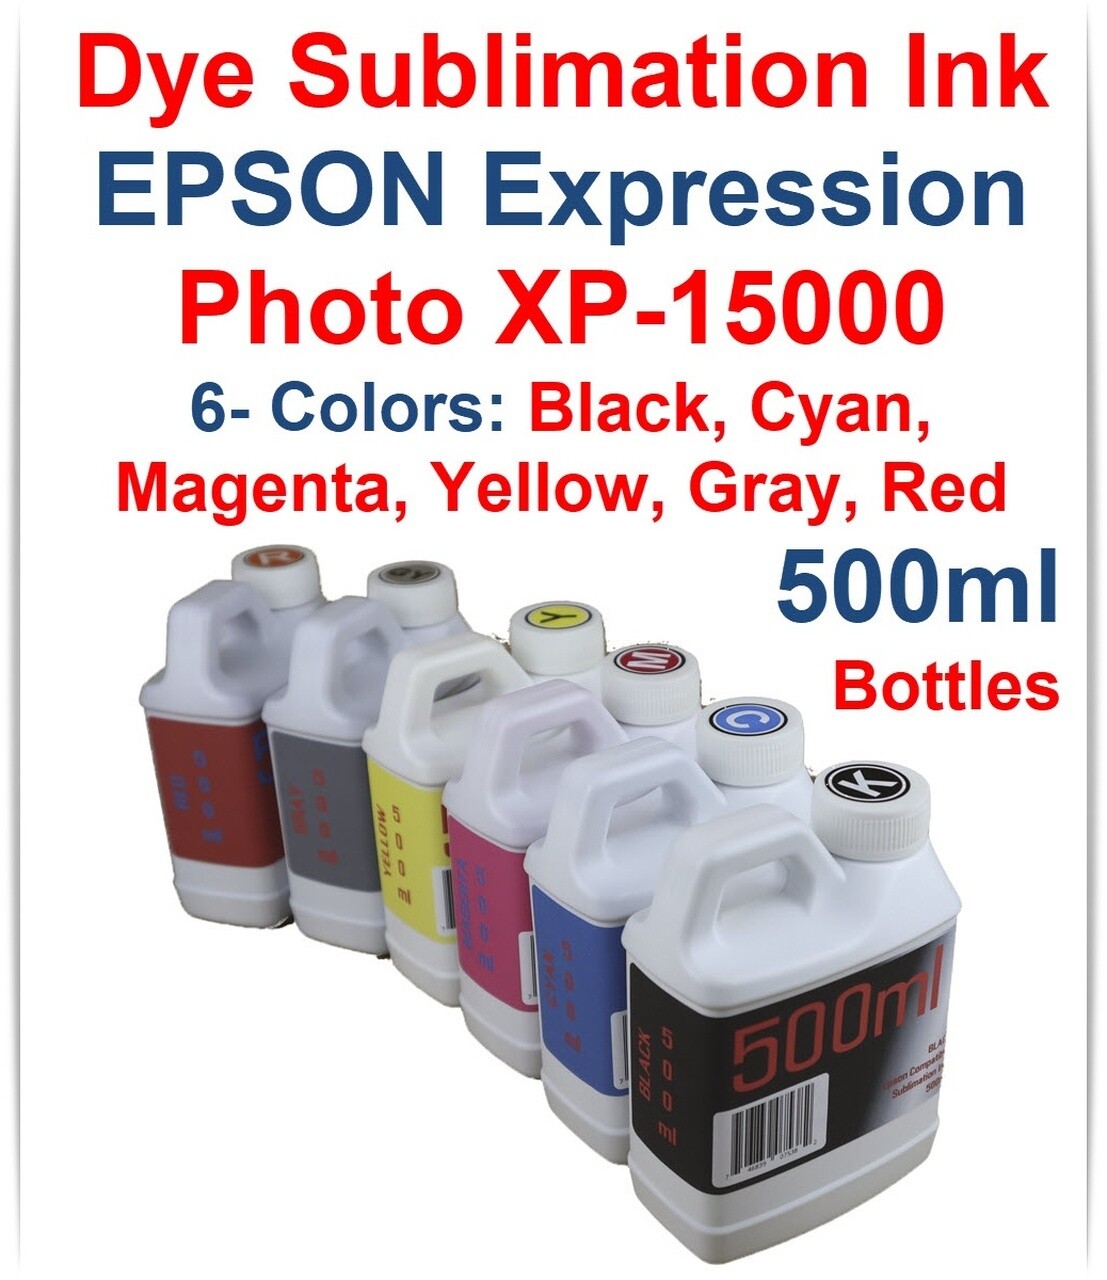 Dye Sublimation Ink 6-500ml for Epson Expression Photo HD XP-15000 printer